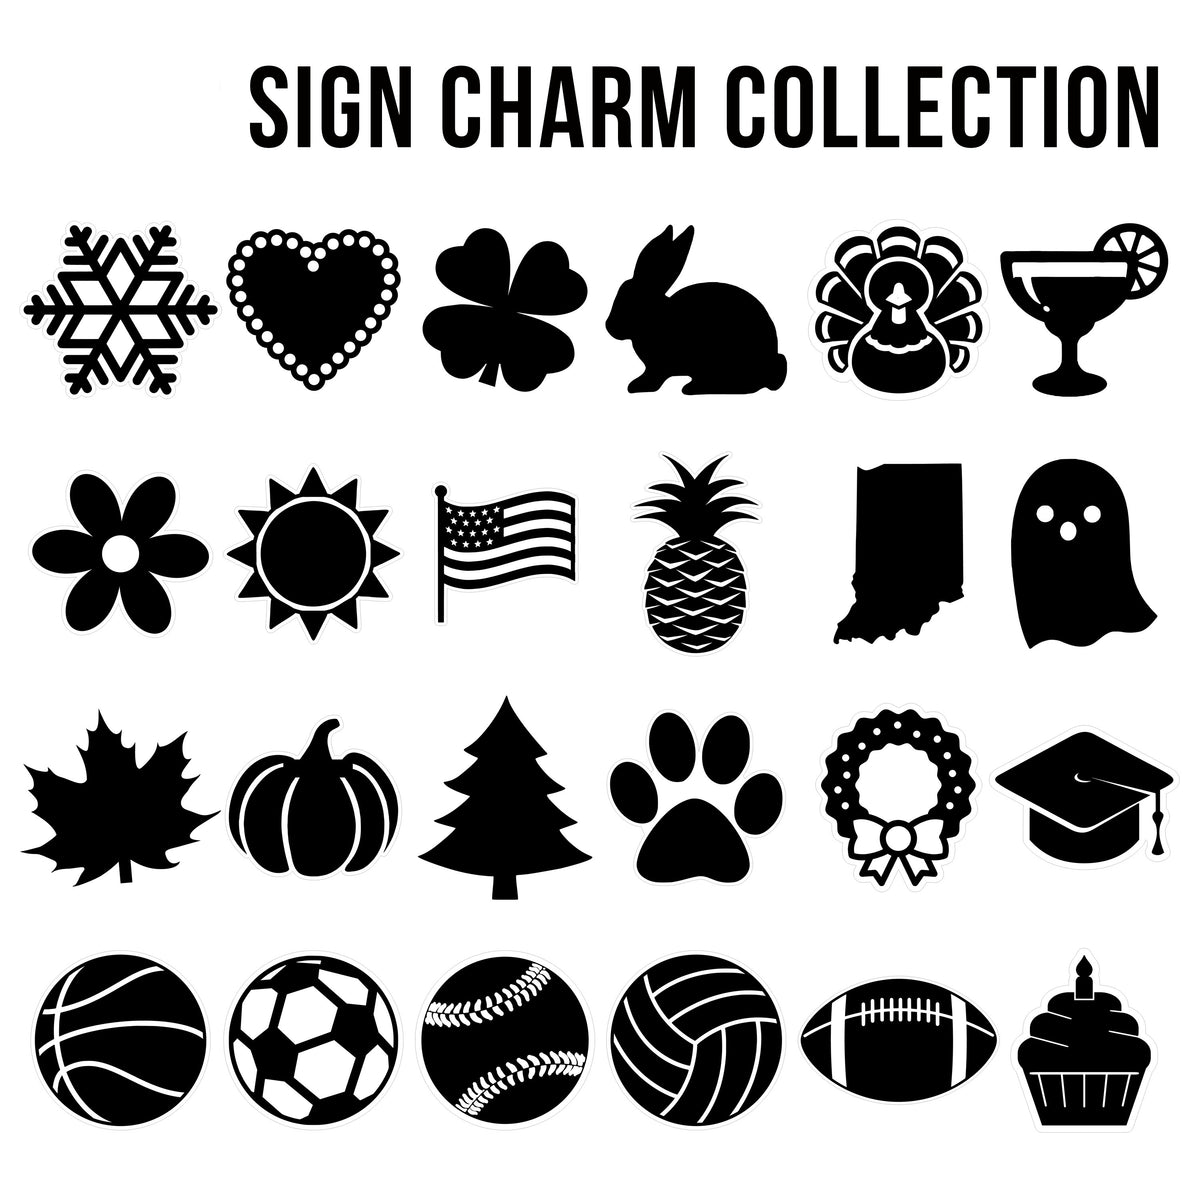 Shape Charms for Interchangeable Signs